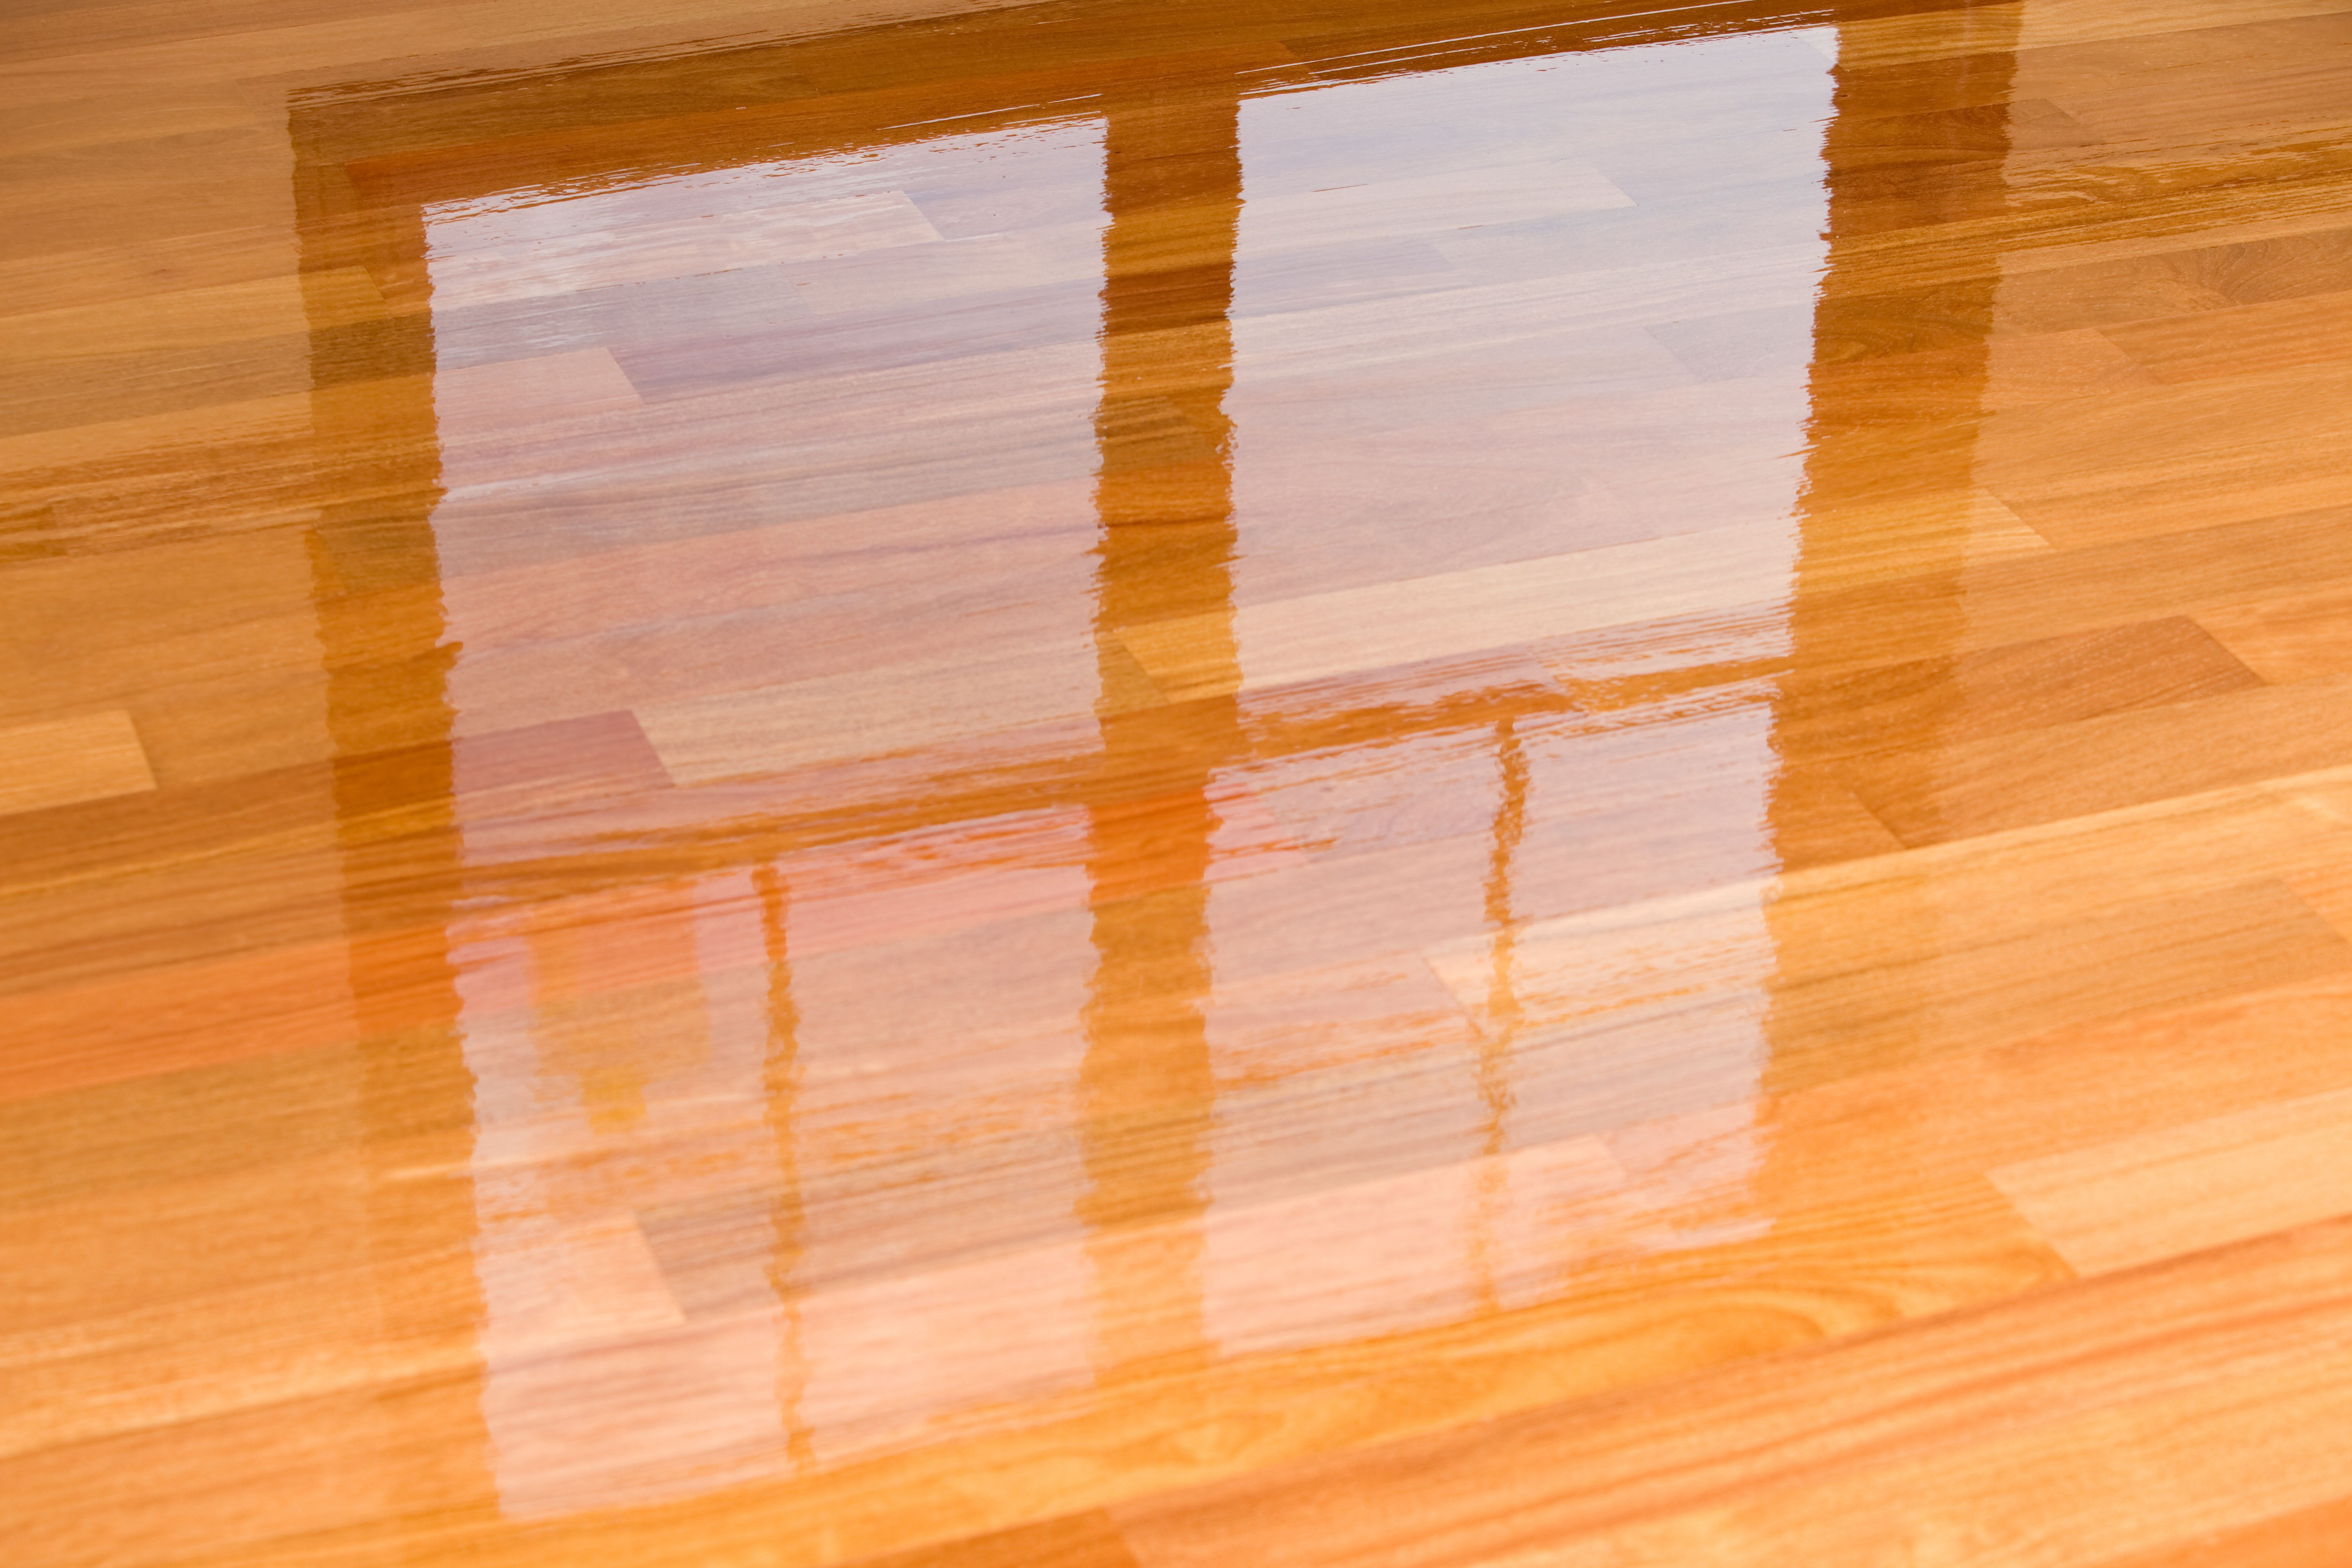 hardwood flooring glued to concrete of guide to laminate flooring water and damage repair in wet polyurethane on new hardwood floor with window reflection 183846705 582e34da3df78c6f6a403968